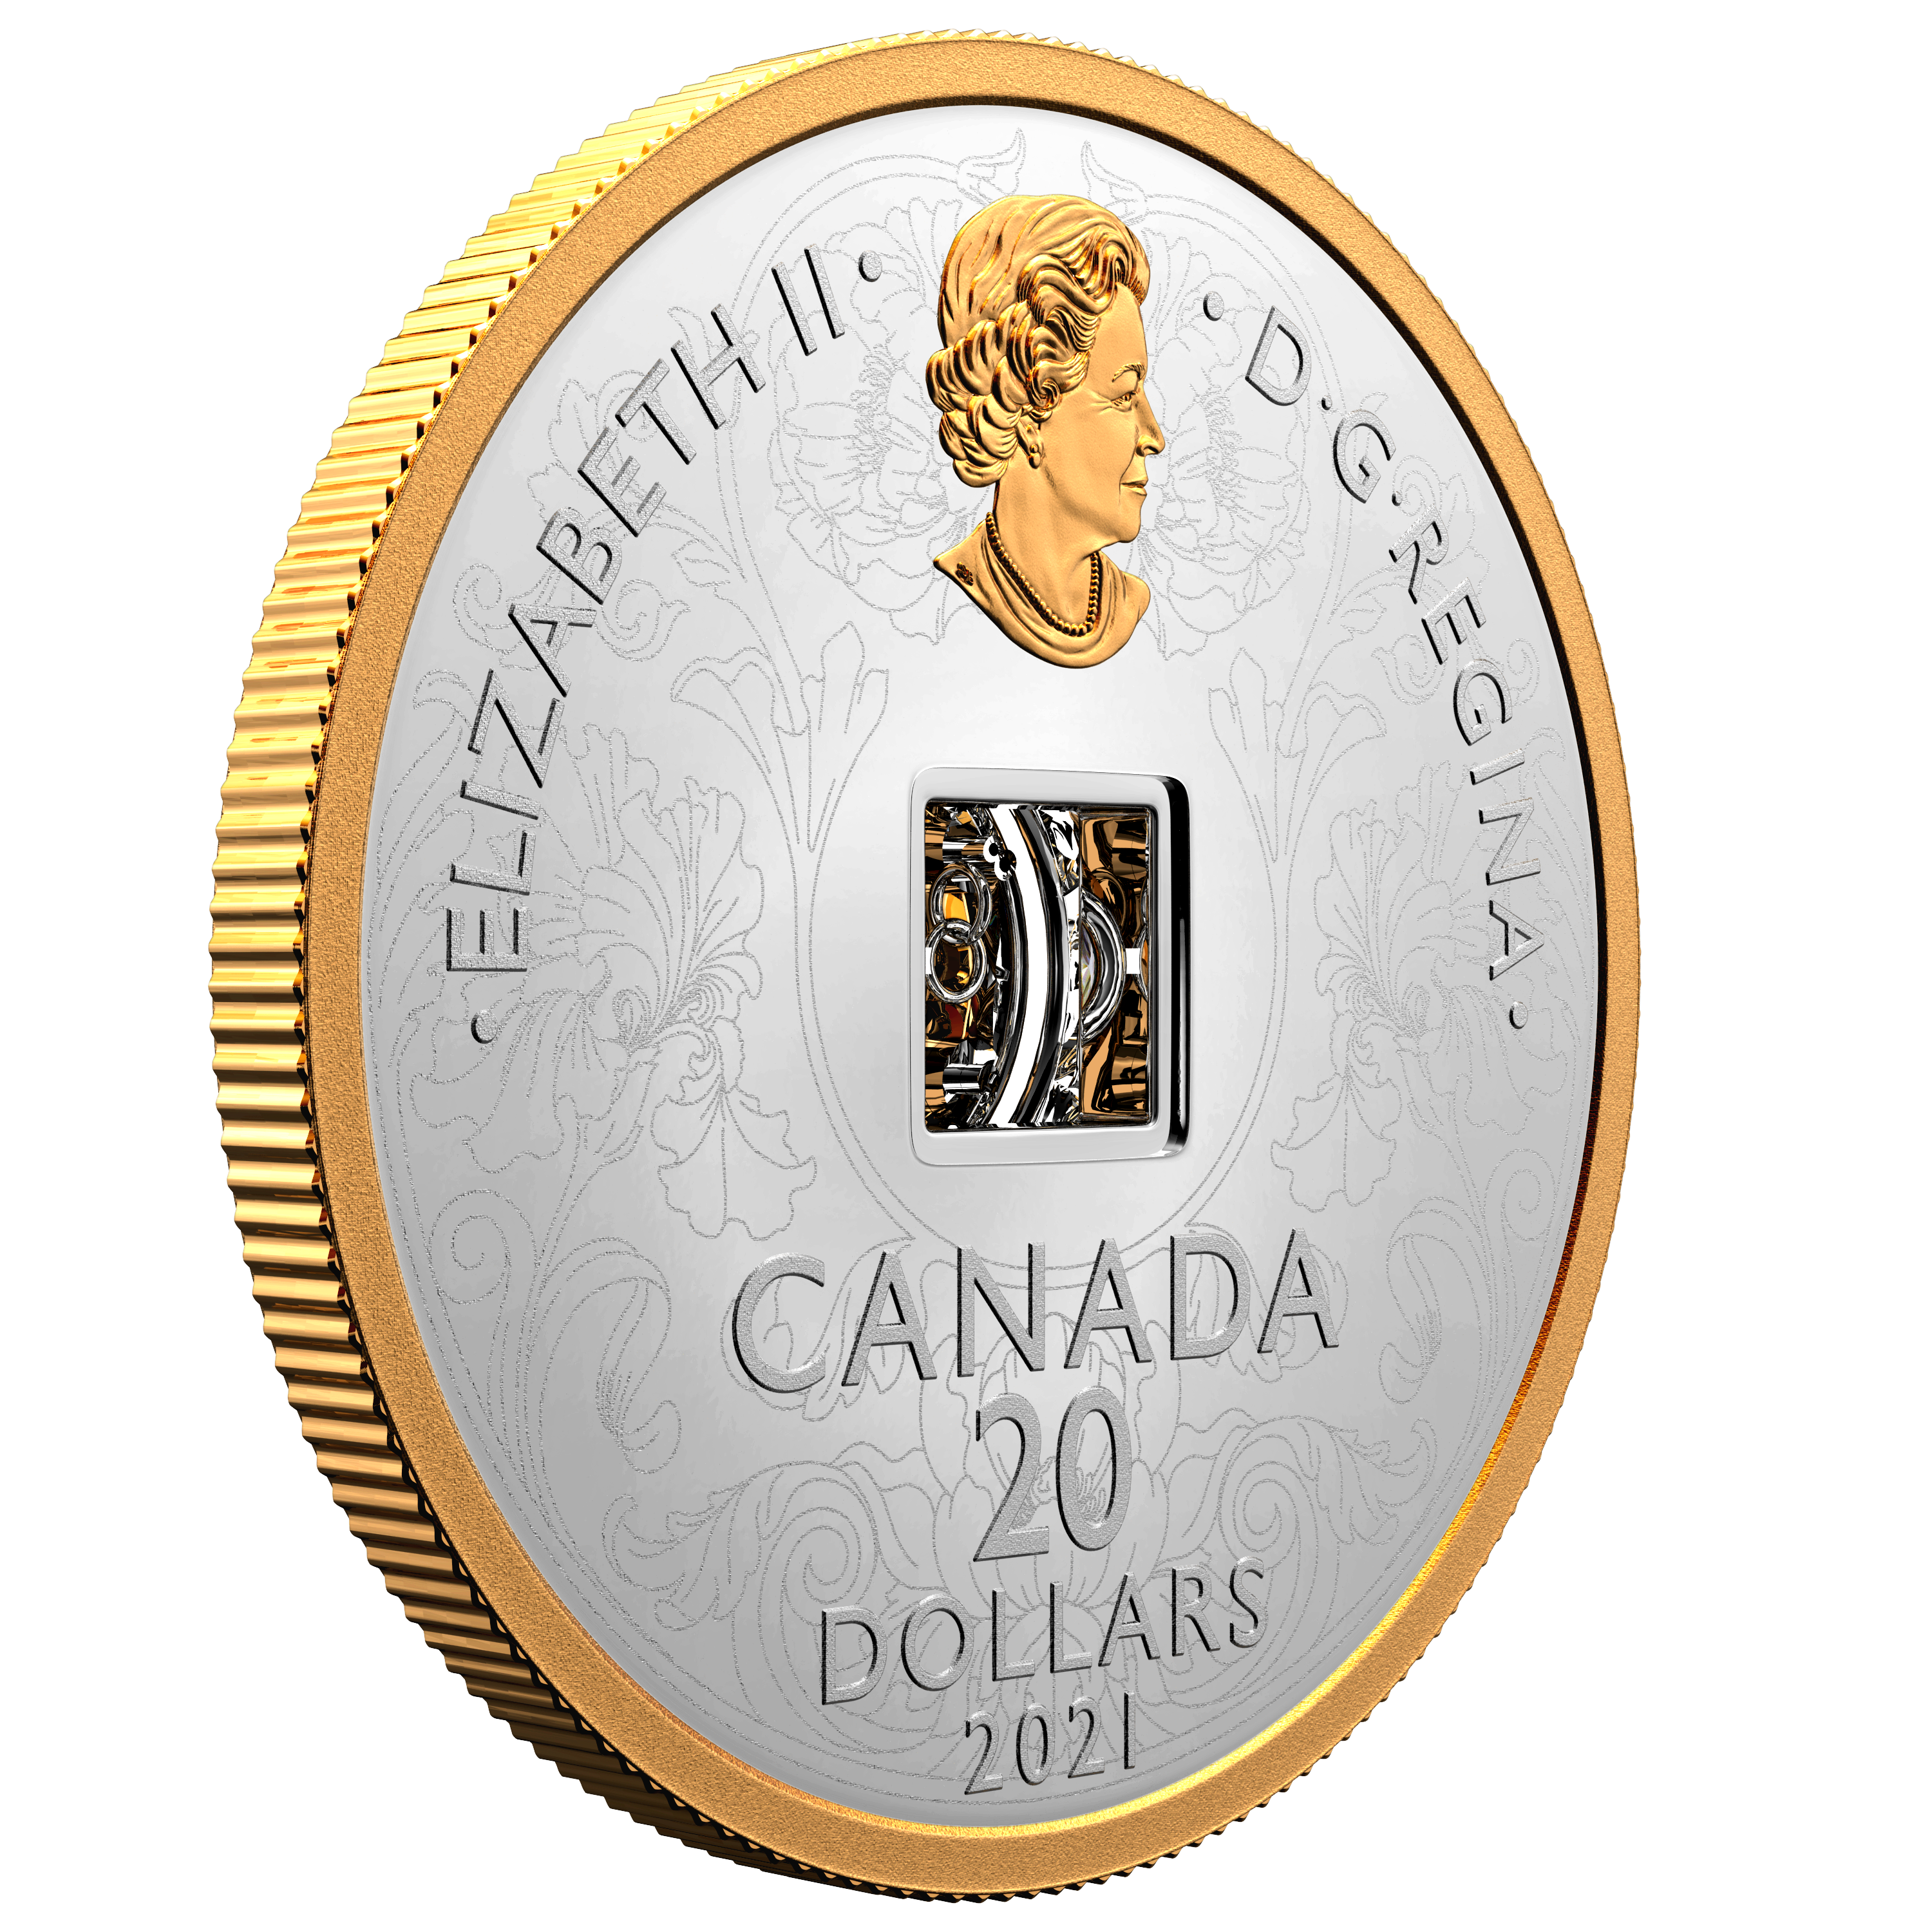 SPARKLE OF THE HEART Silver Coin $20 Canada 2021